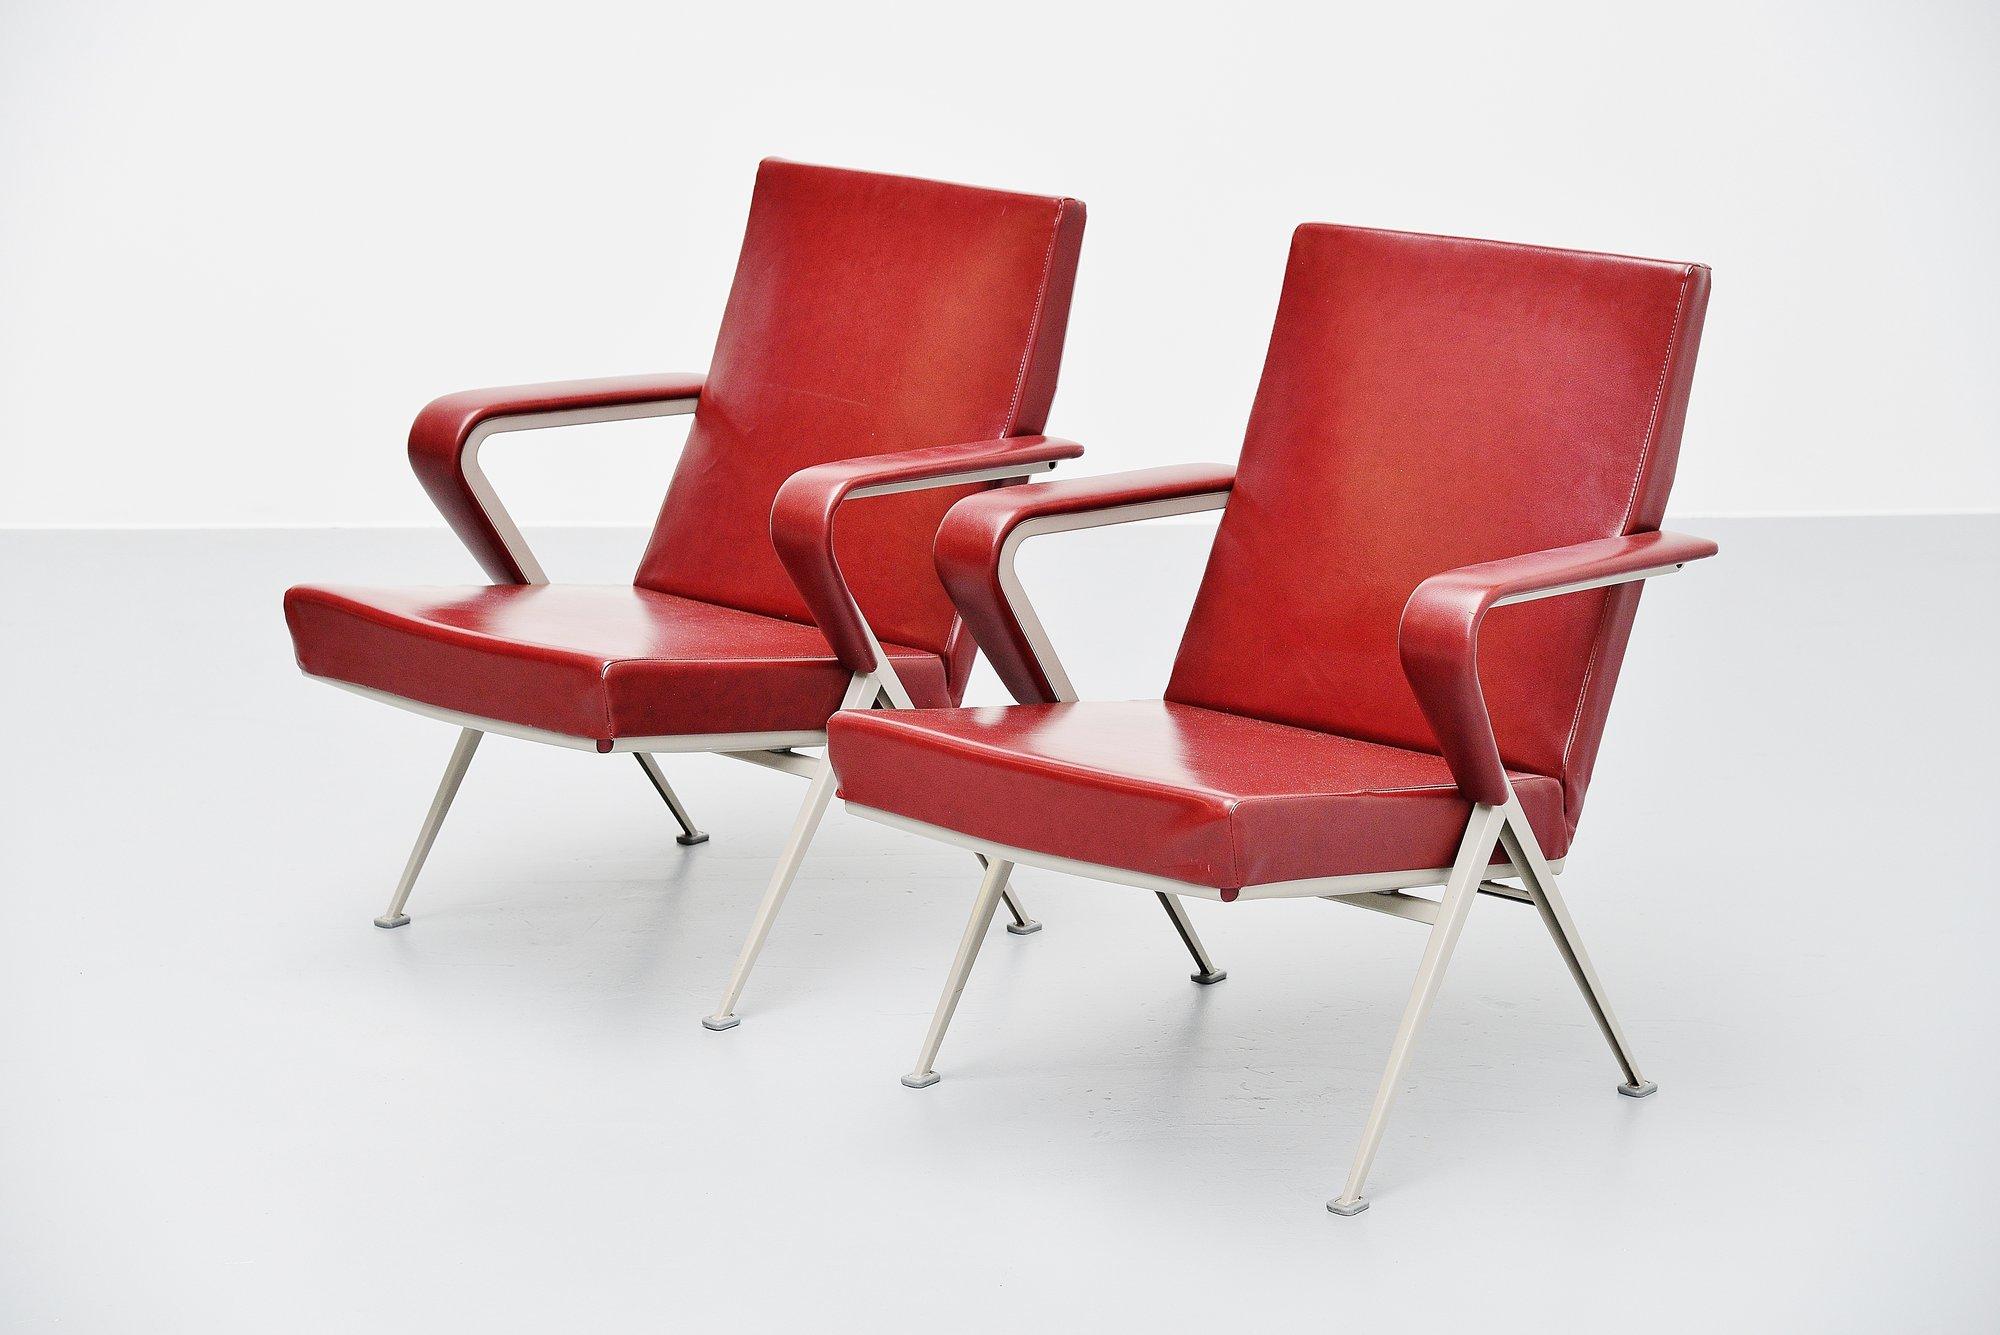 Cold-Painted Repose Chairs Friso Kramer for Ahrend de Cirkel, 1959